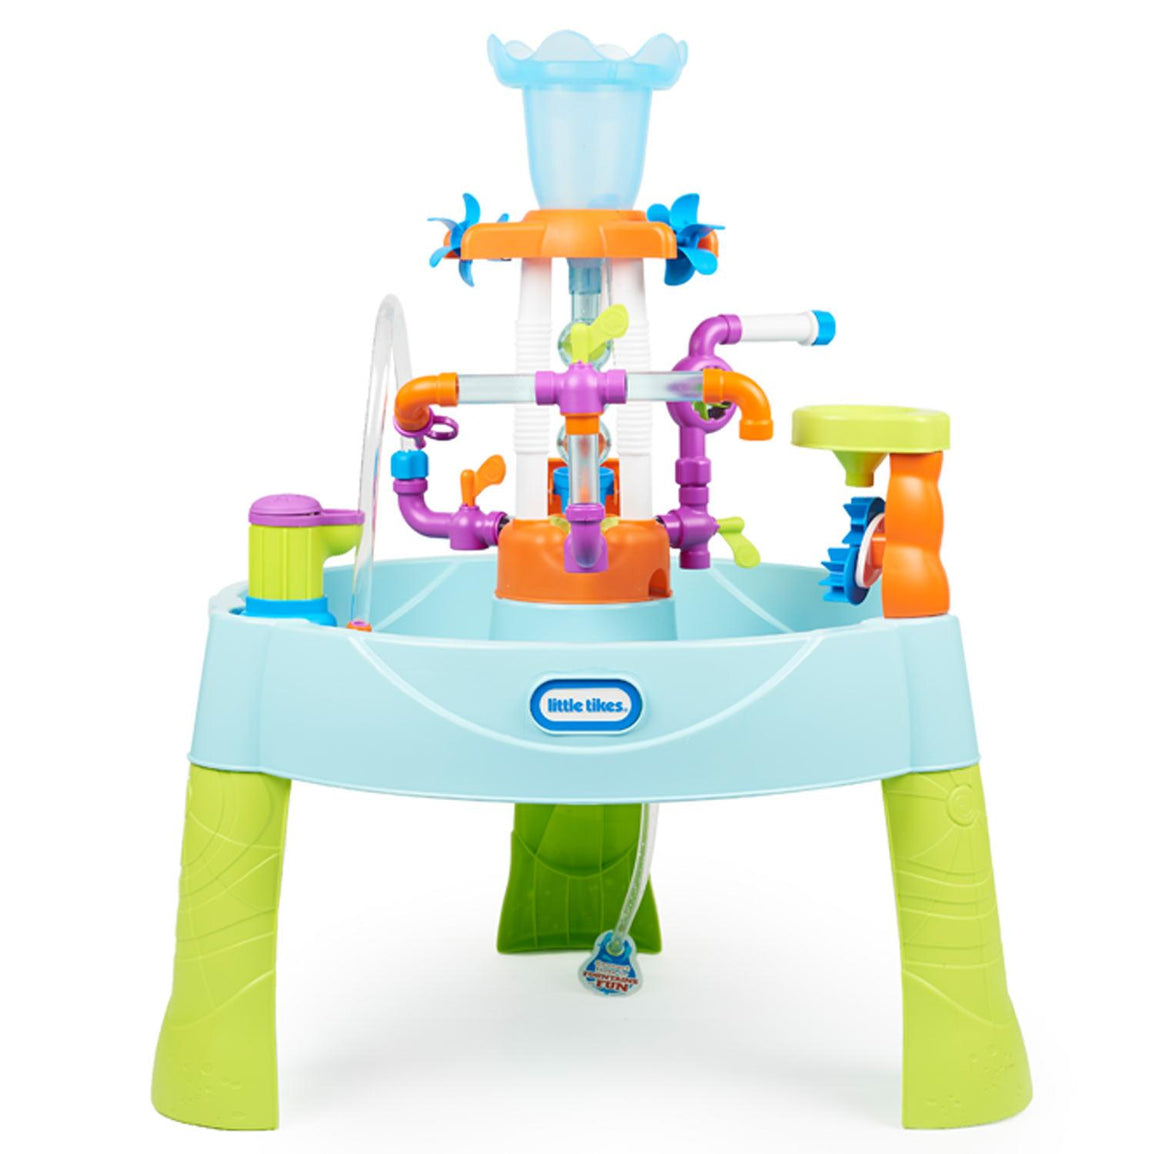 Flowin' Fun Water Table™ - Official Little Tikes Website